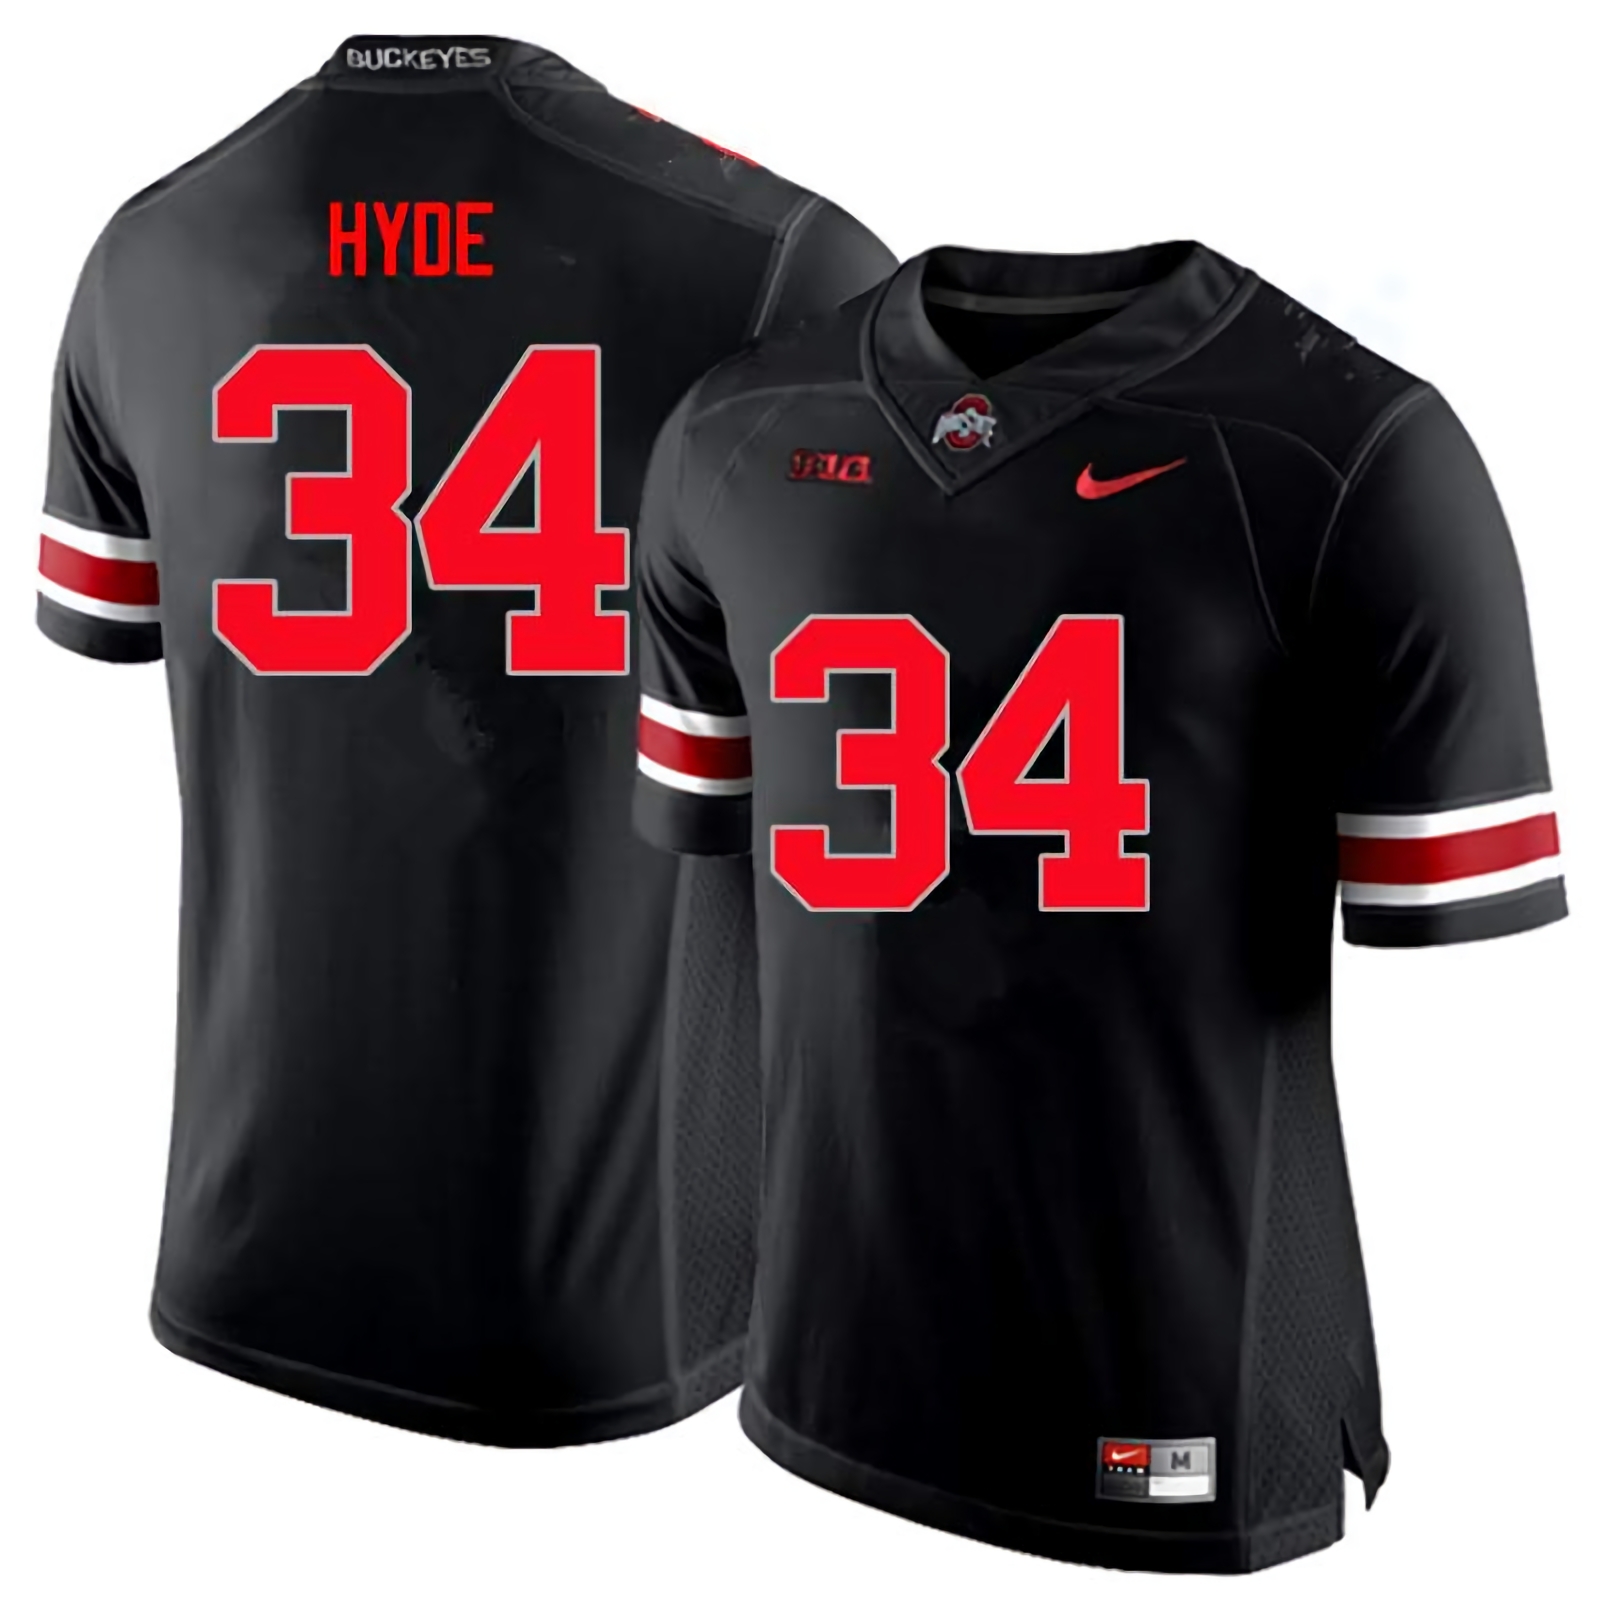 Carlos Hyde Ohio State Buckeyes Men's NCAA #34 Nike Black Limited College Stitched Football Jersey OFQ7556VS